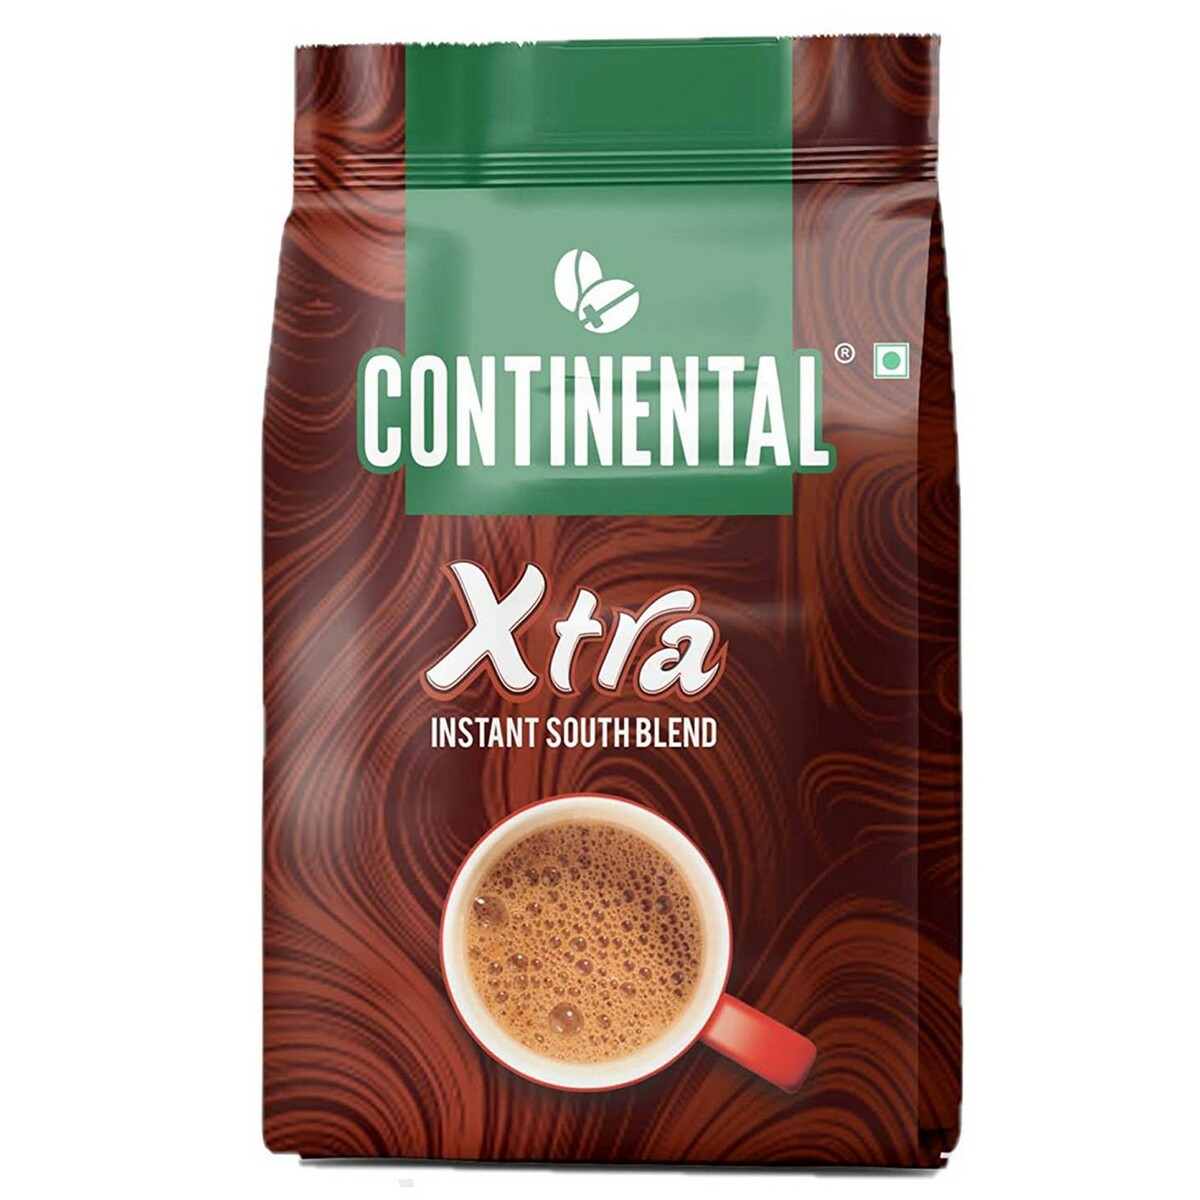 Continental Extra Instant South Blend Coffee200g